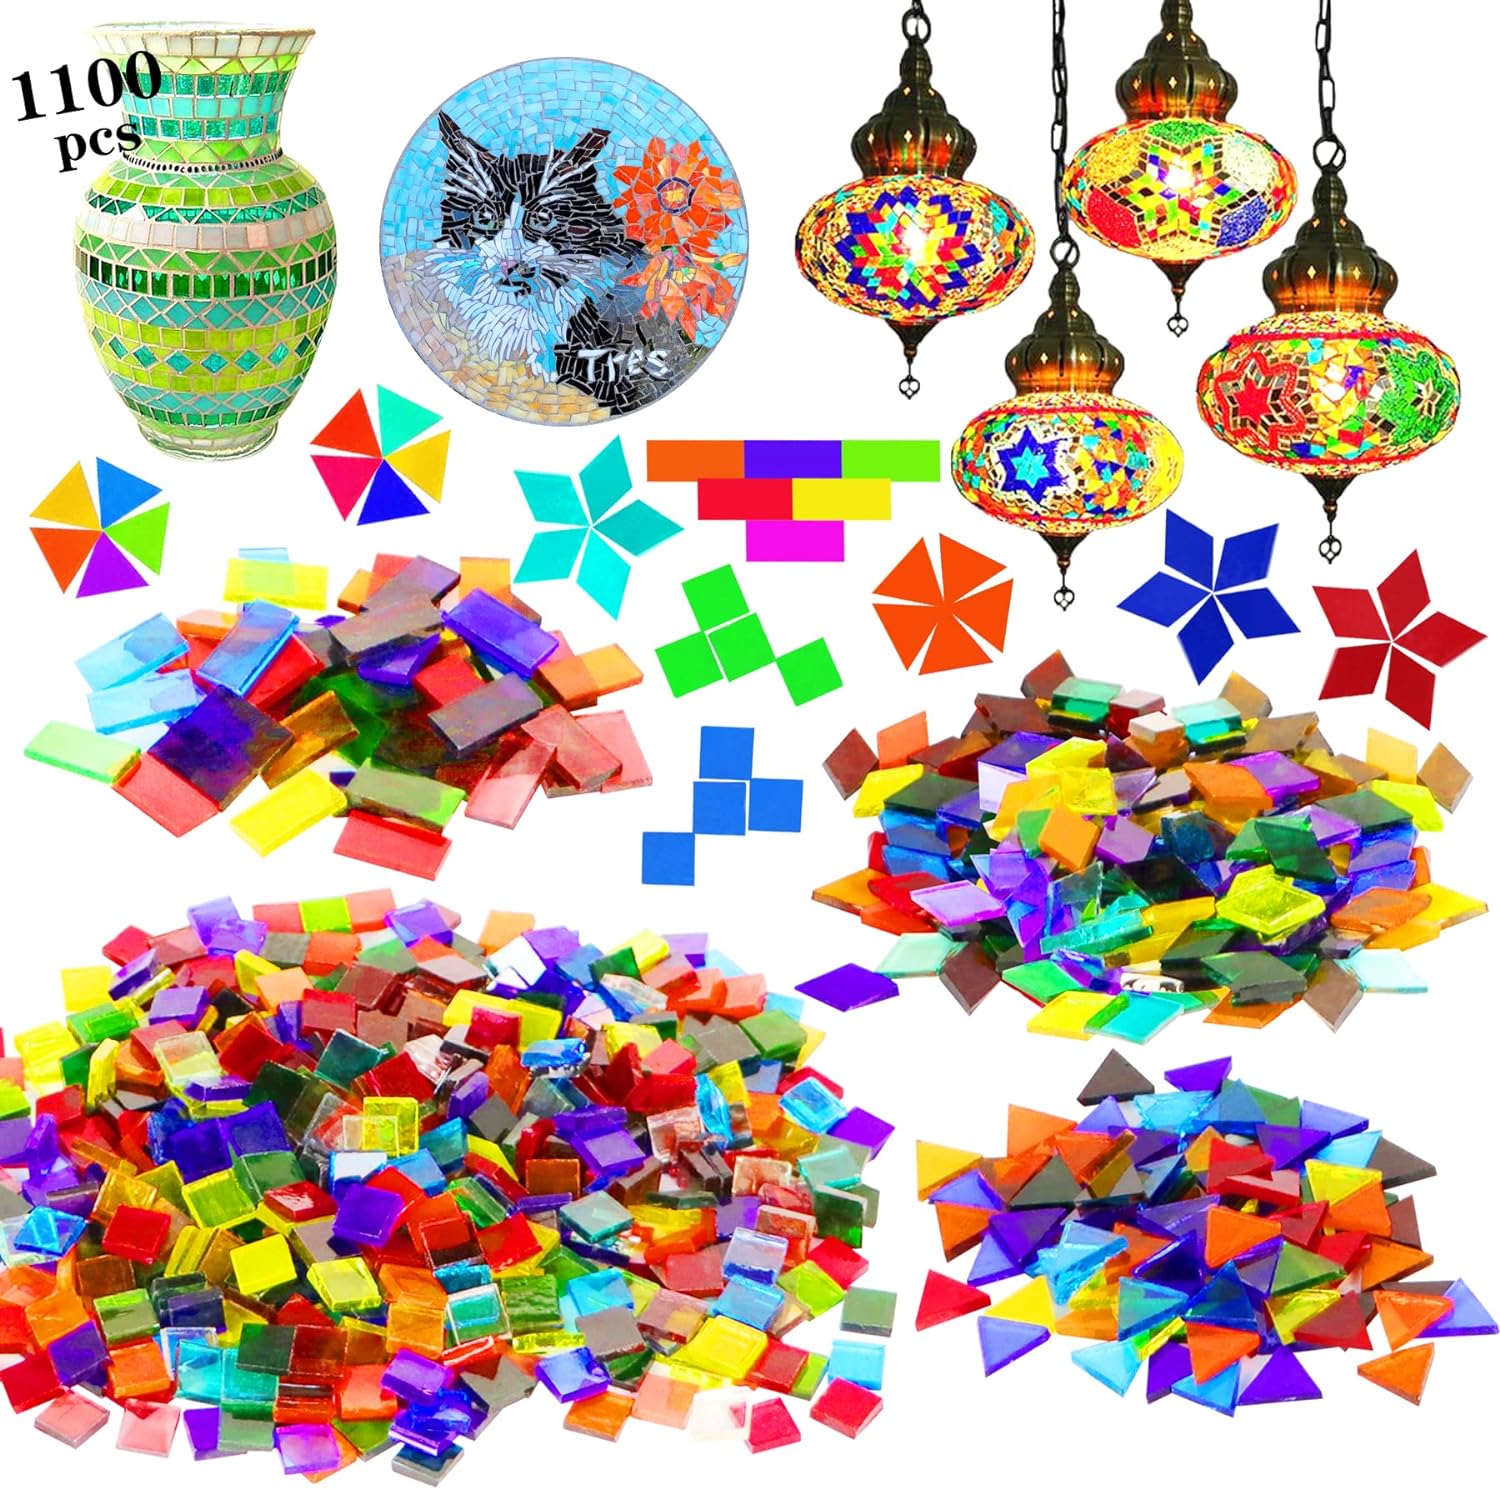 1000 Pieces of Square Mosaic Tiles for Crafts, Textured Stained